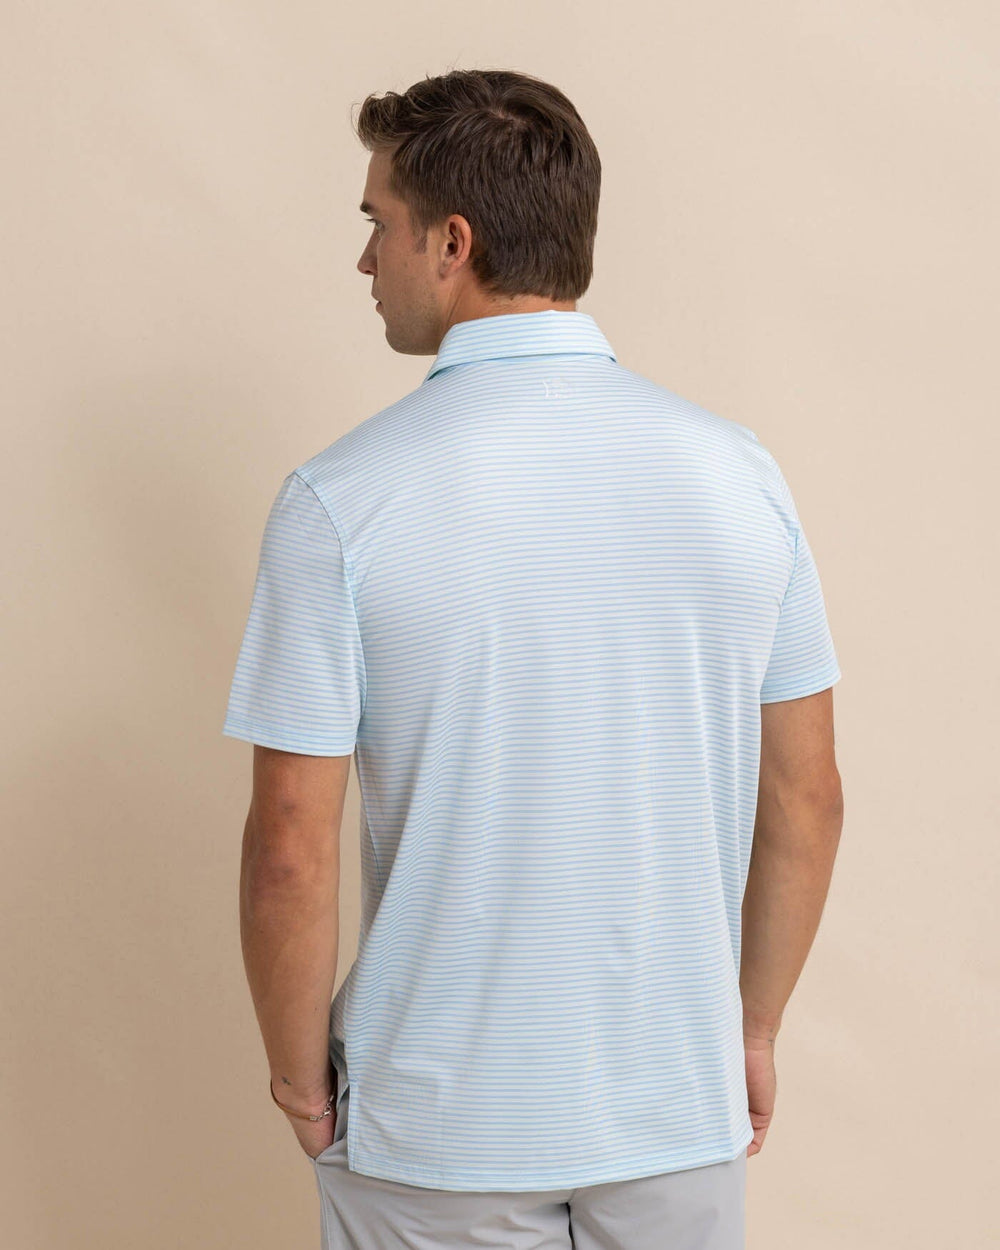 The back view of the Southern Tide Driver Verdae Stripe Polo by Southern Tide - Seacrest Green